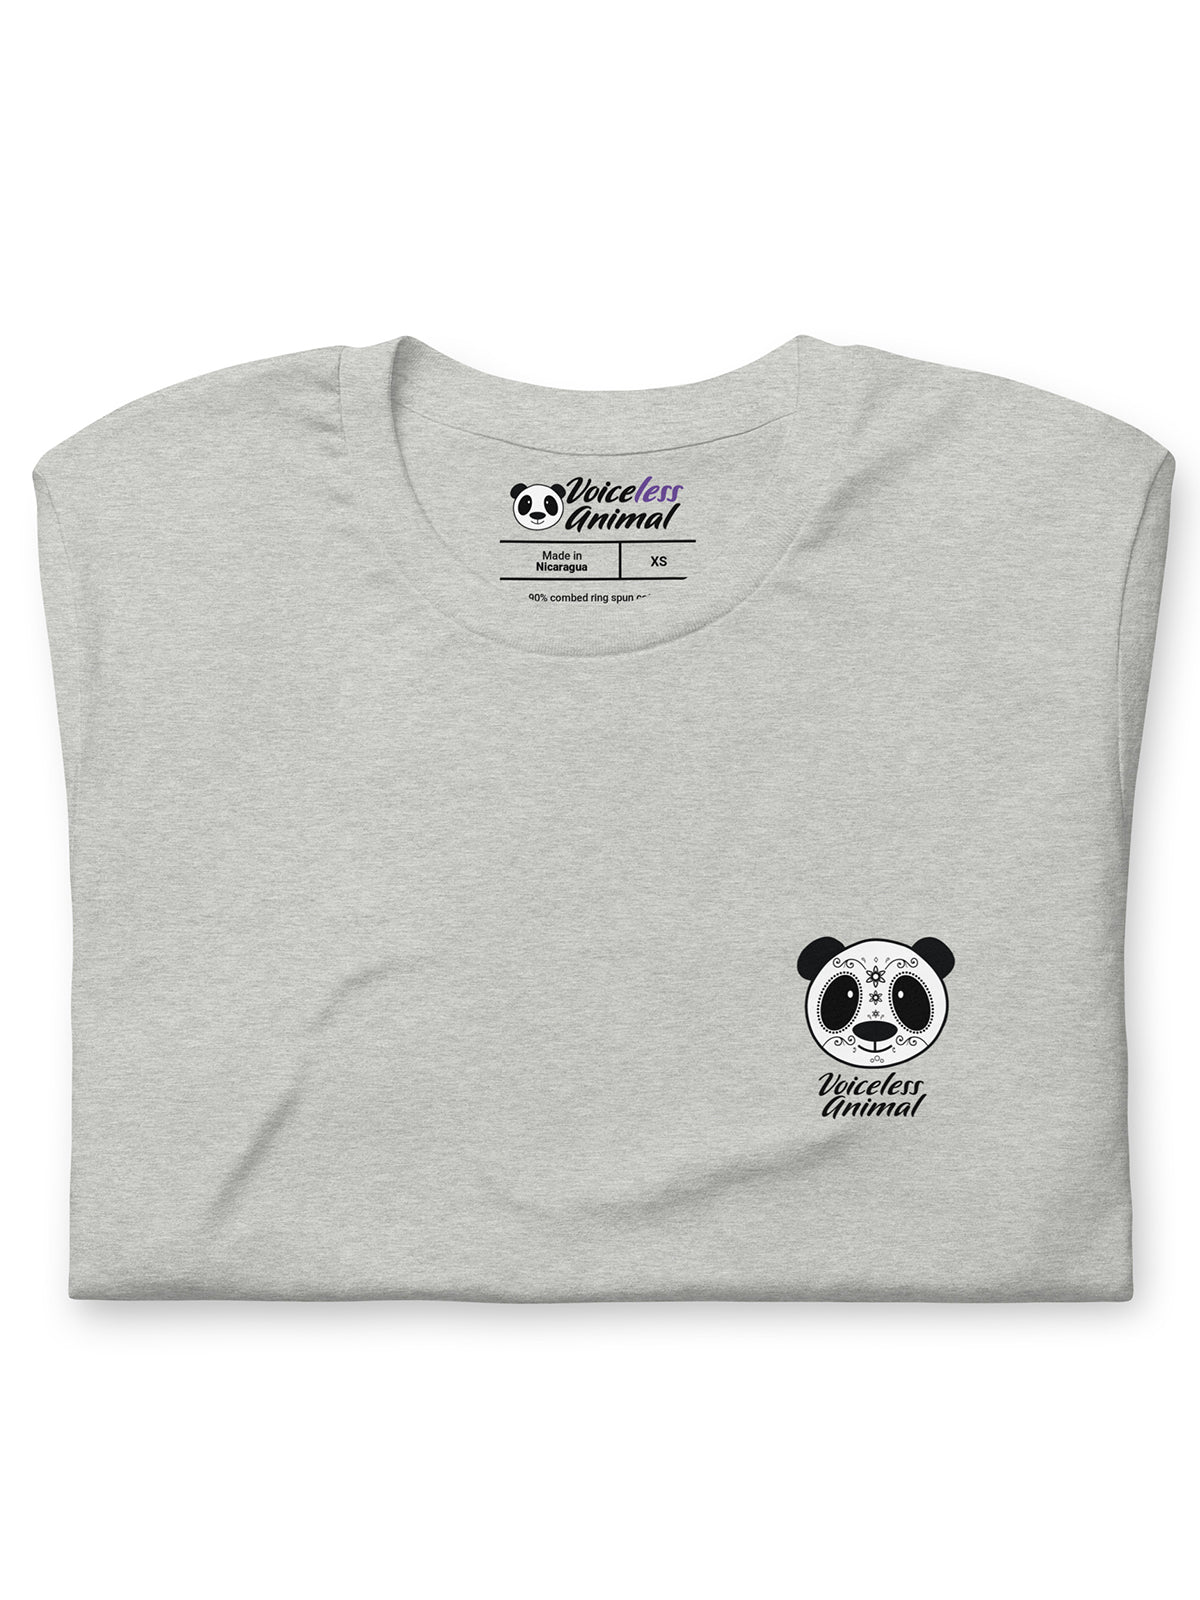 Day Of The Dead Panda - Special Edition Premium Gray Unisex t-shirt